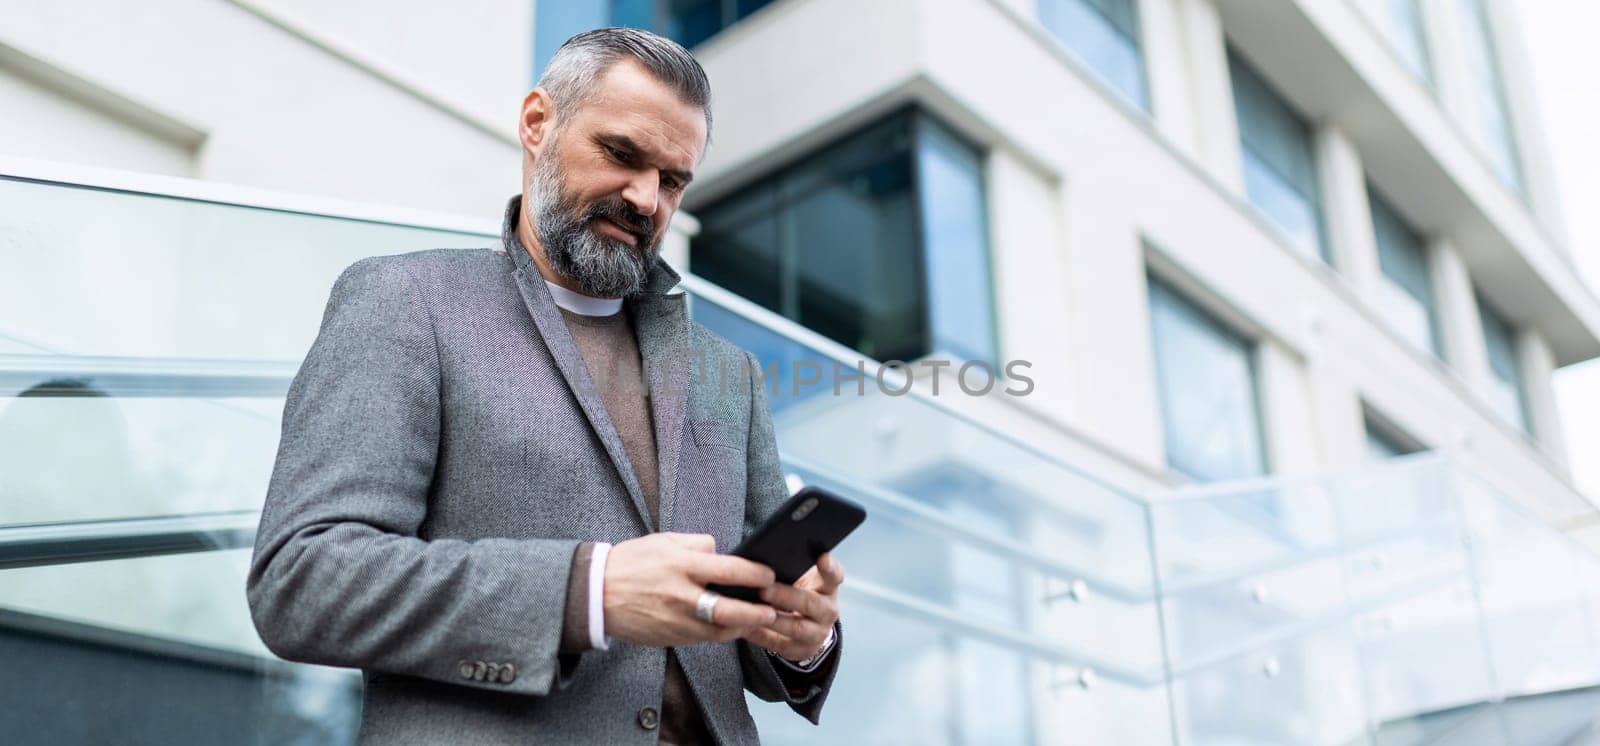 mature adult male financier with gray hair and a beard with a phone in his hands on the background of the building.